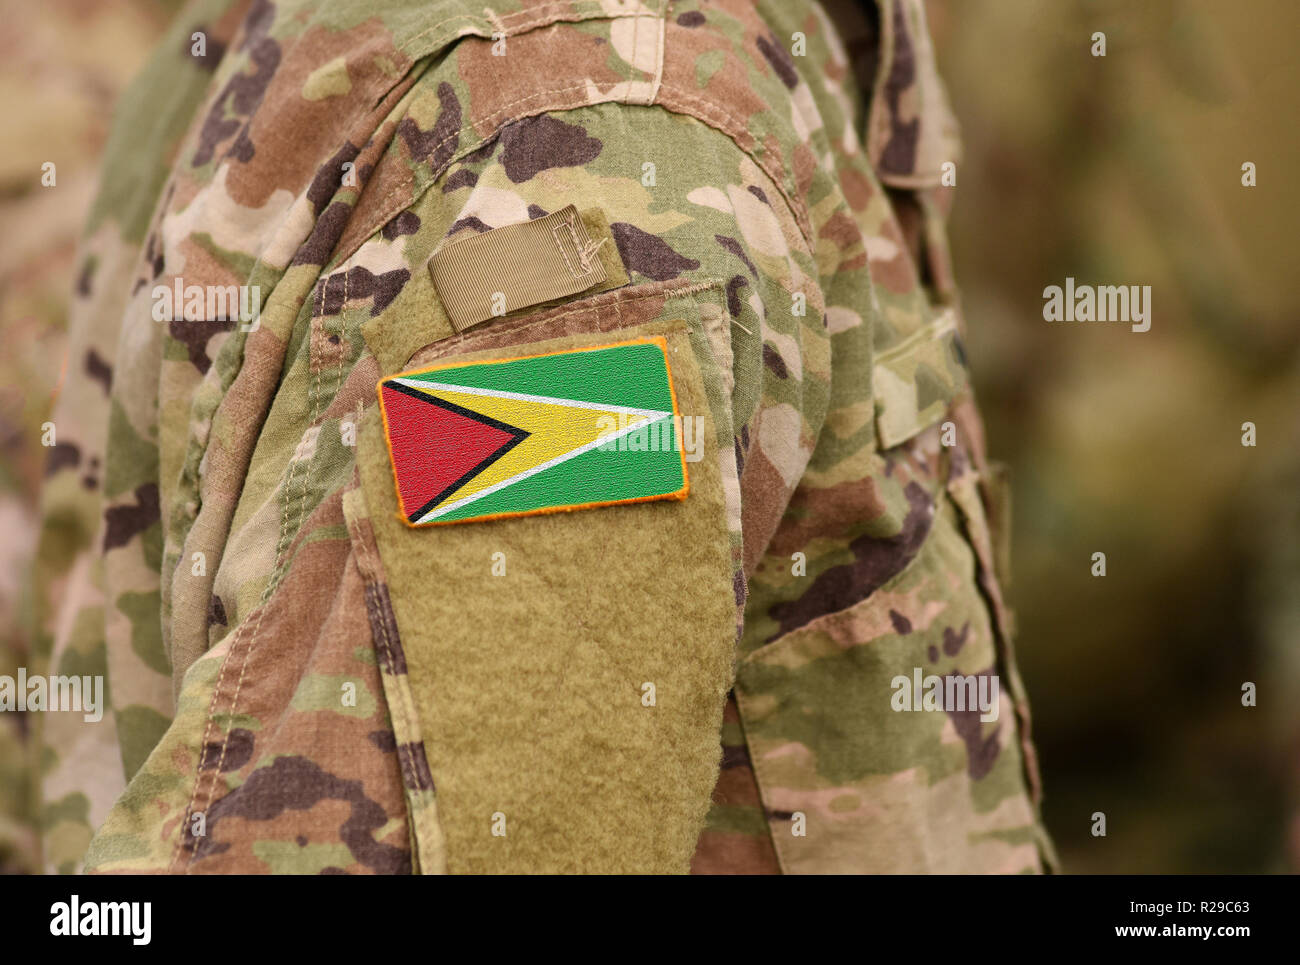 Guyana flag on soldiers arm. Co-operative Republic of Guyana troops (collage) Stock Photo